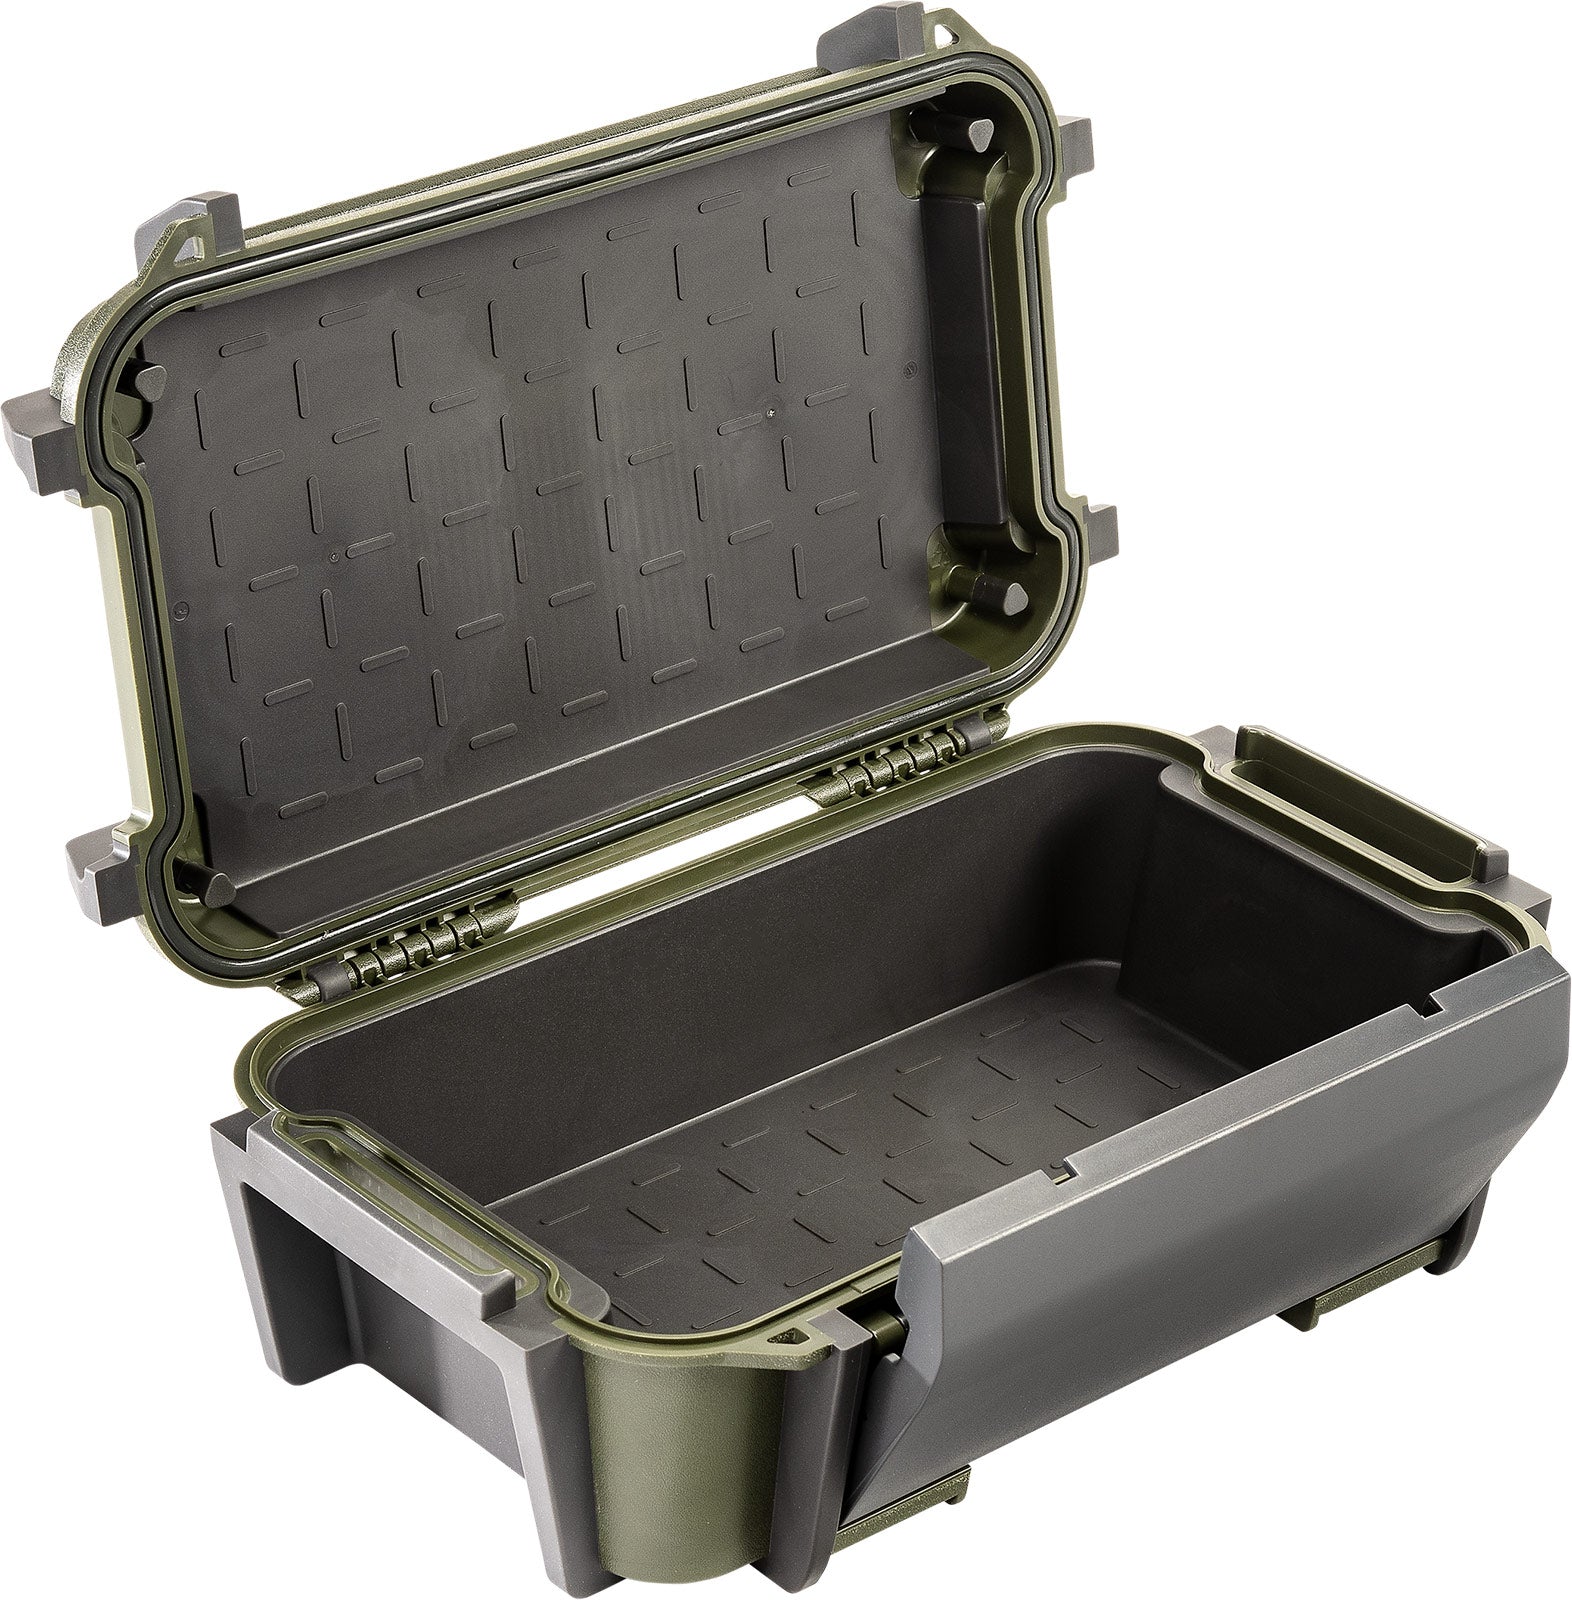 R60 Personal Utility Ruck Case